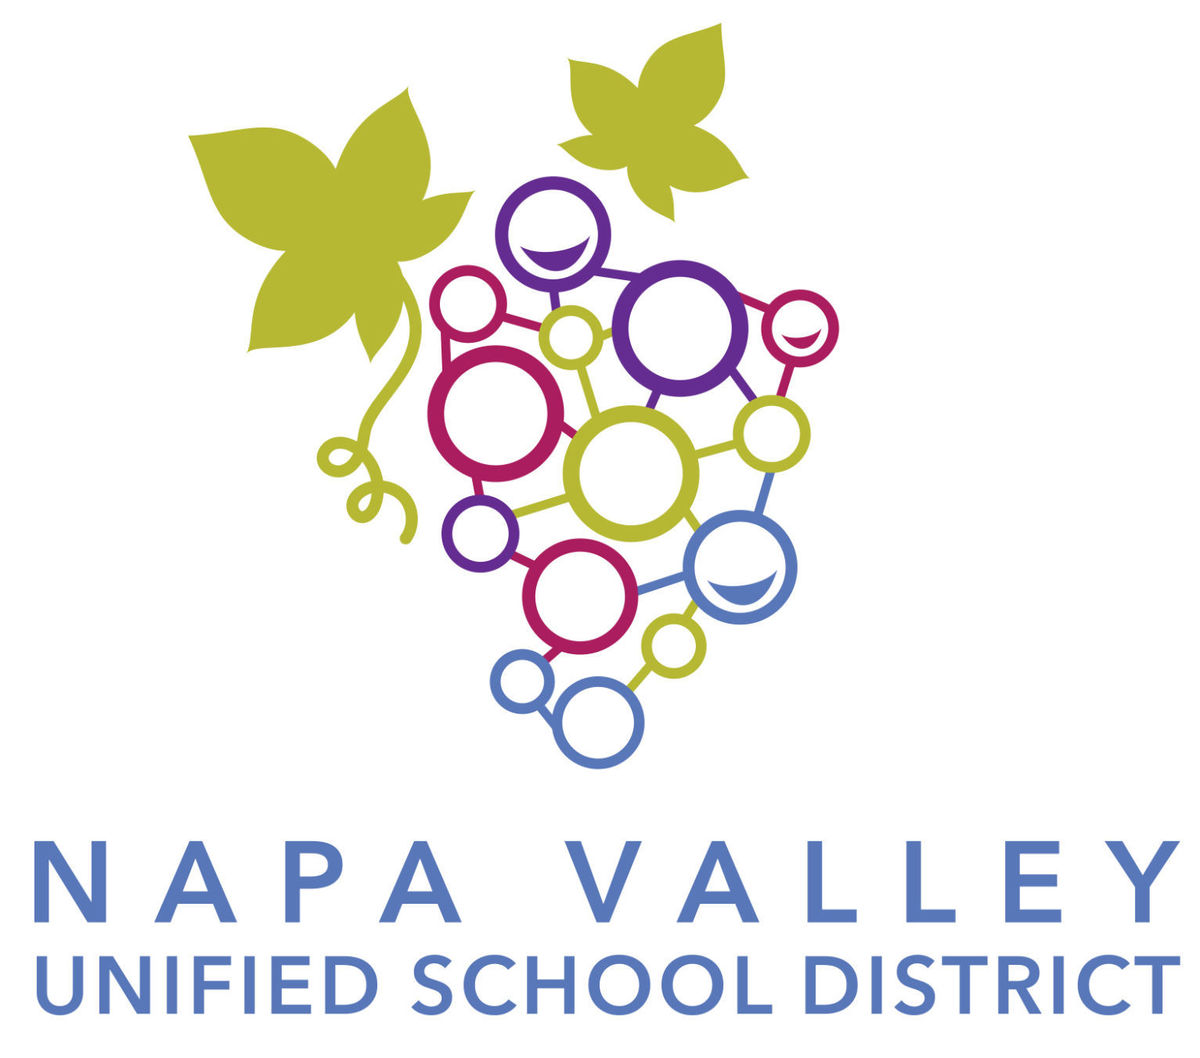 Log of Napa Valley Unified School district where Tom Kensok is a member of the school board of napa and practices school law as a member of the napa school board this is the board logo and links to his bio 